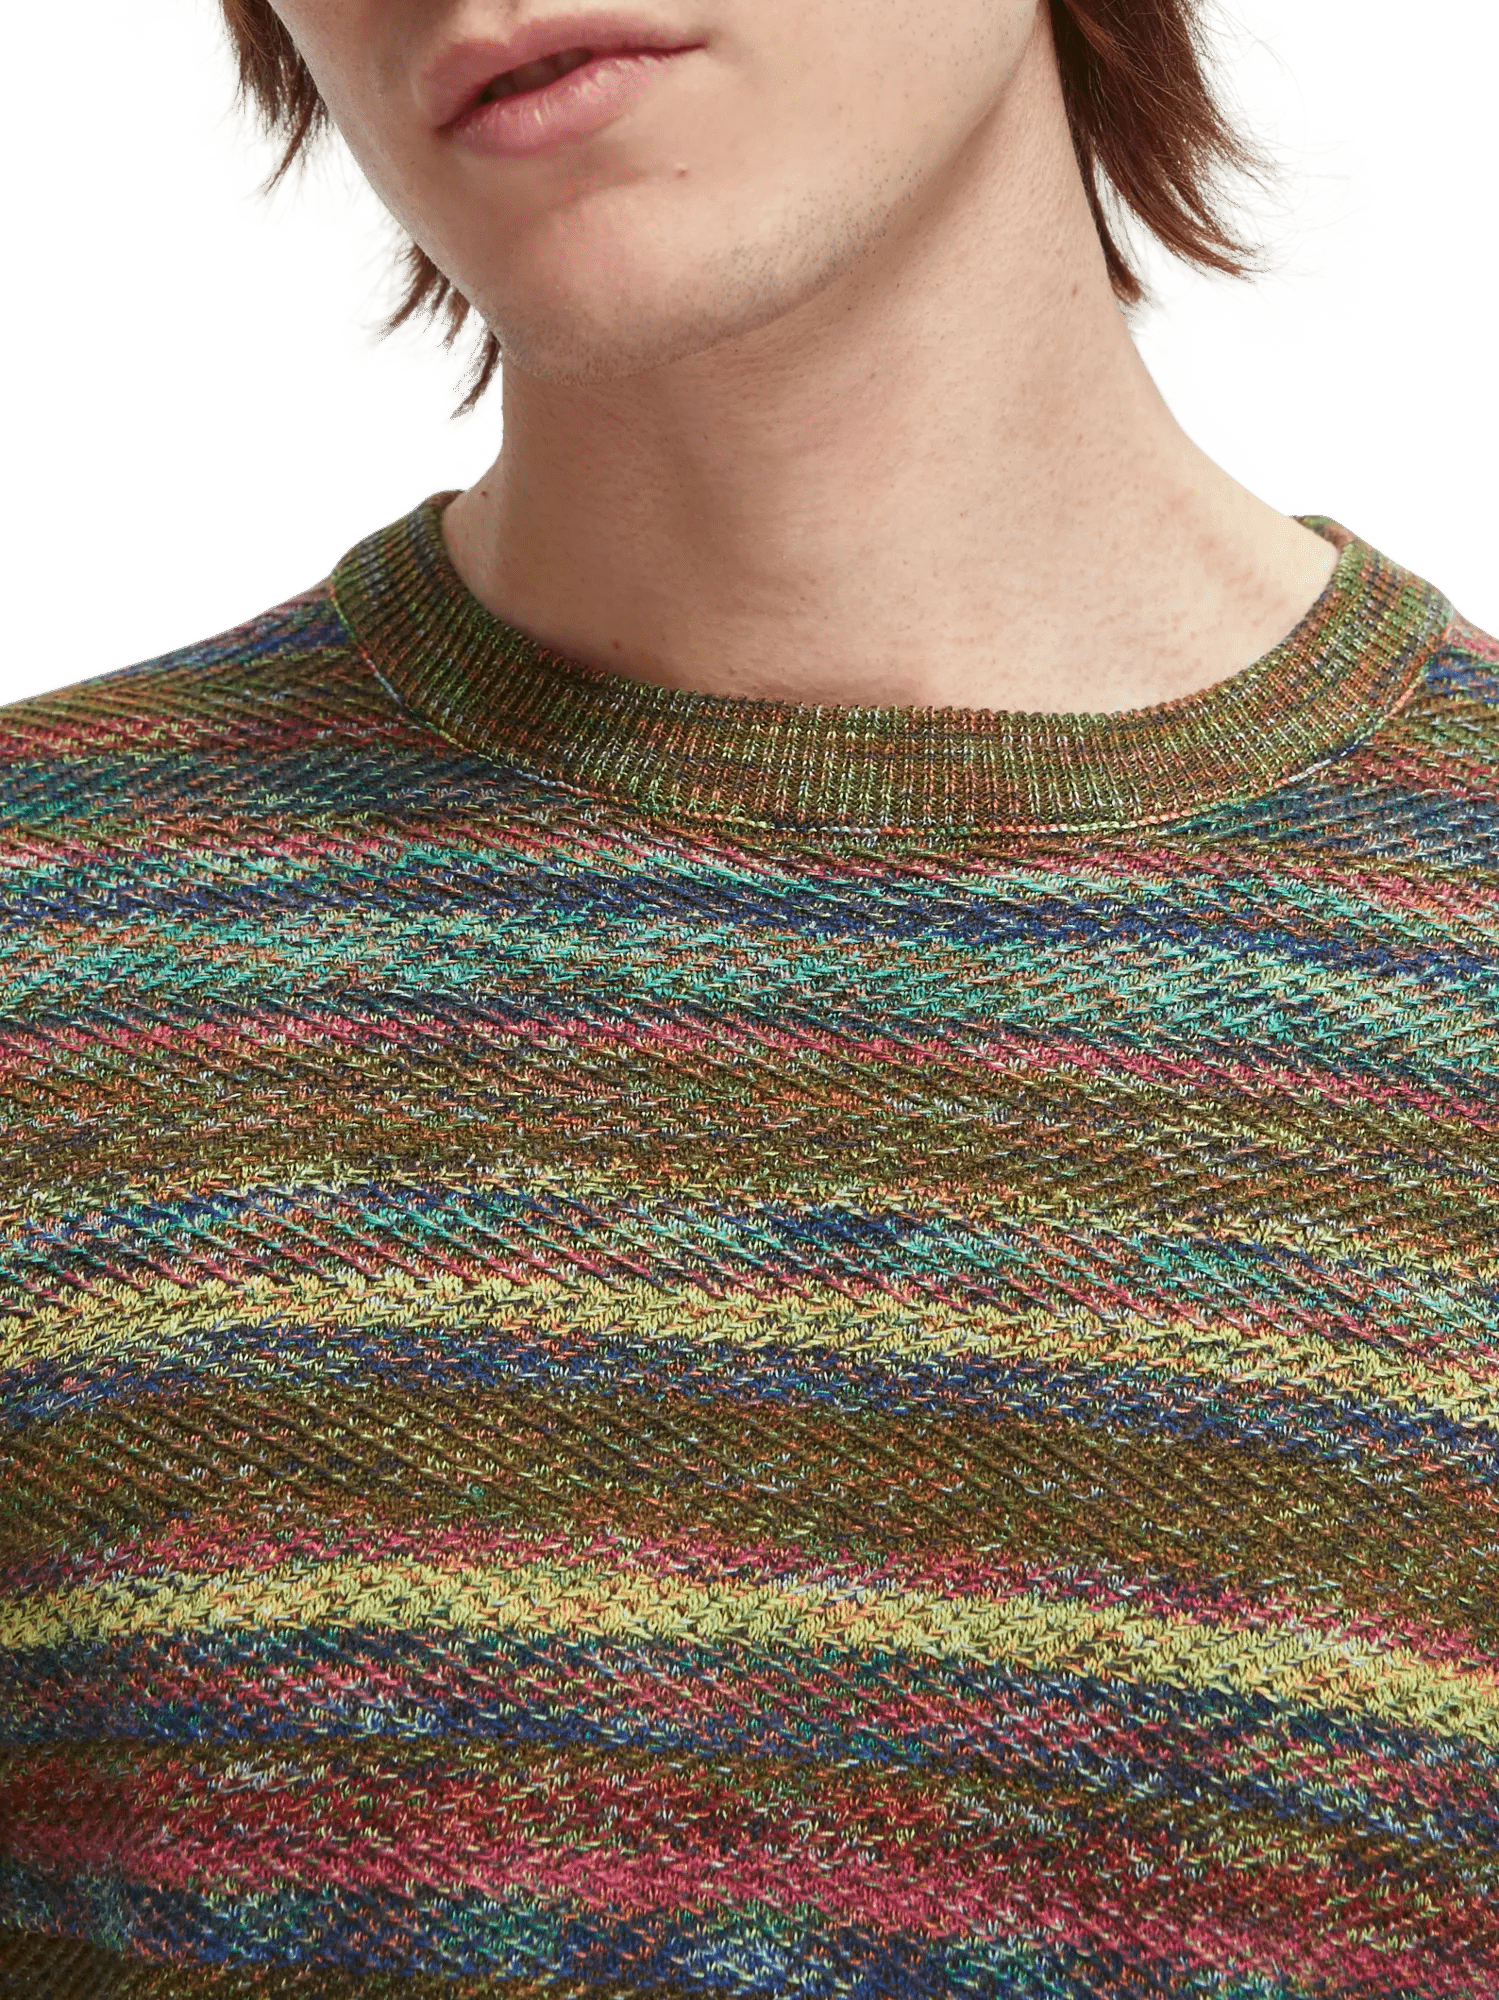 Structured space-dye crewneck sweater